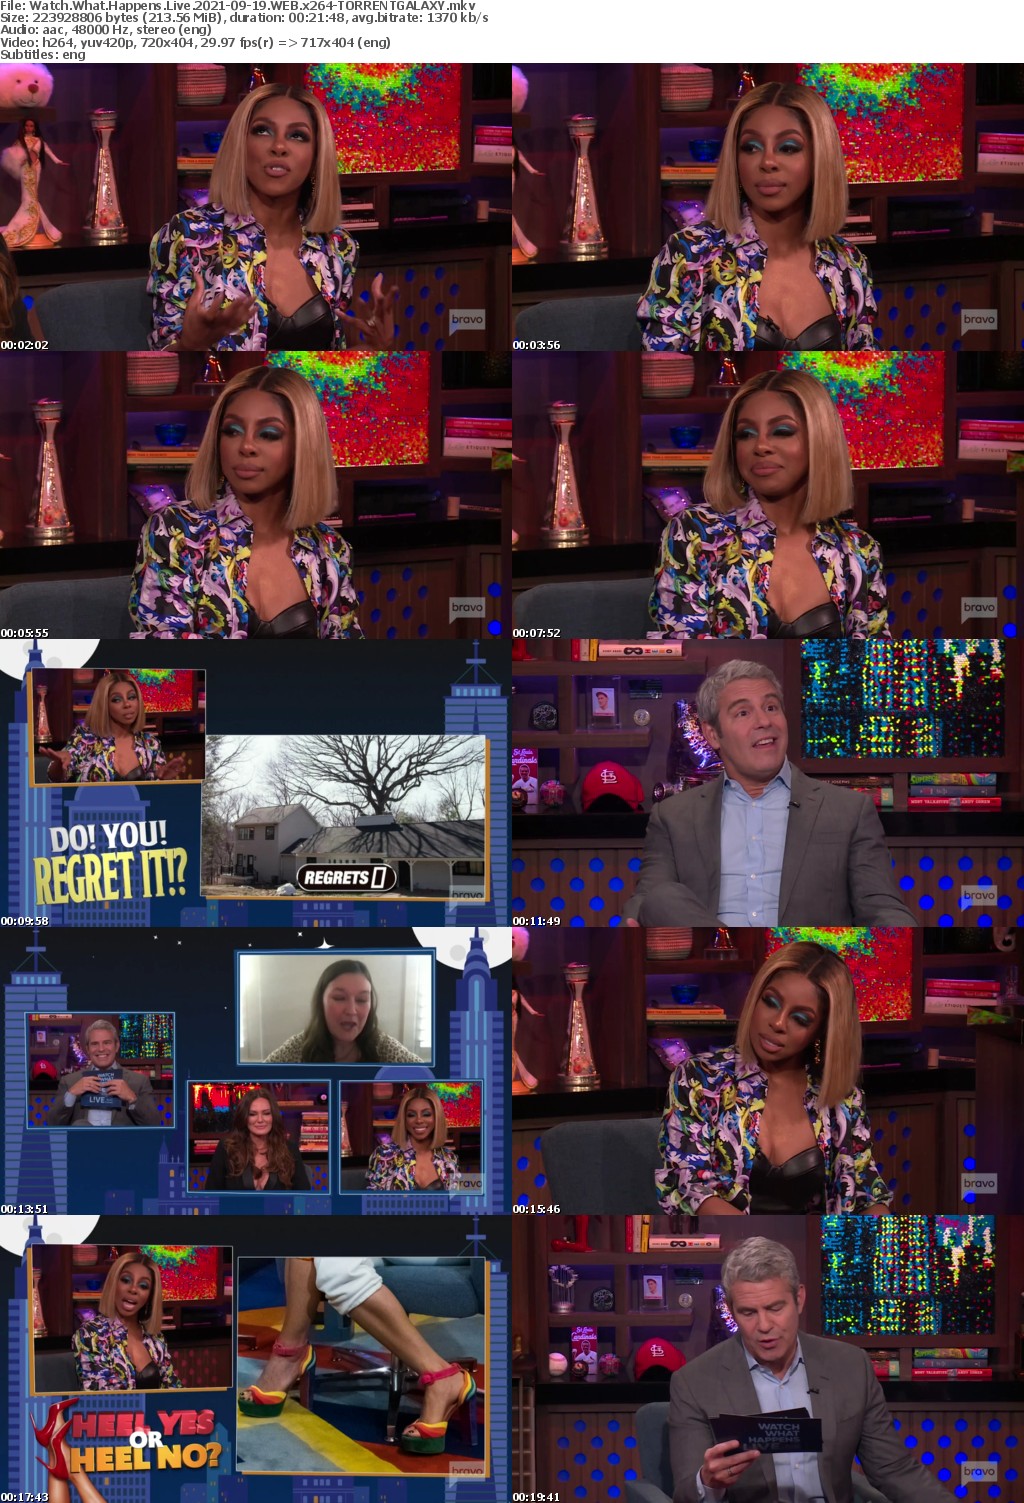 Watch What Happens Live 2021-09-19 WEB x264-GALAXY